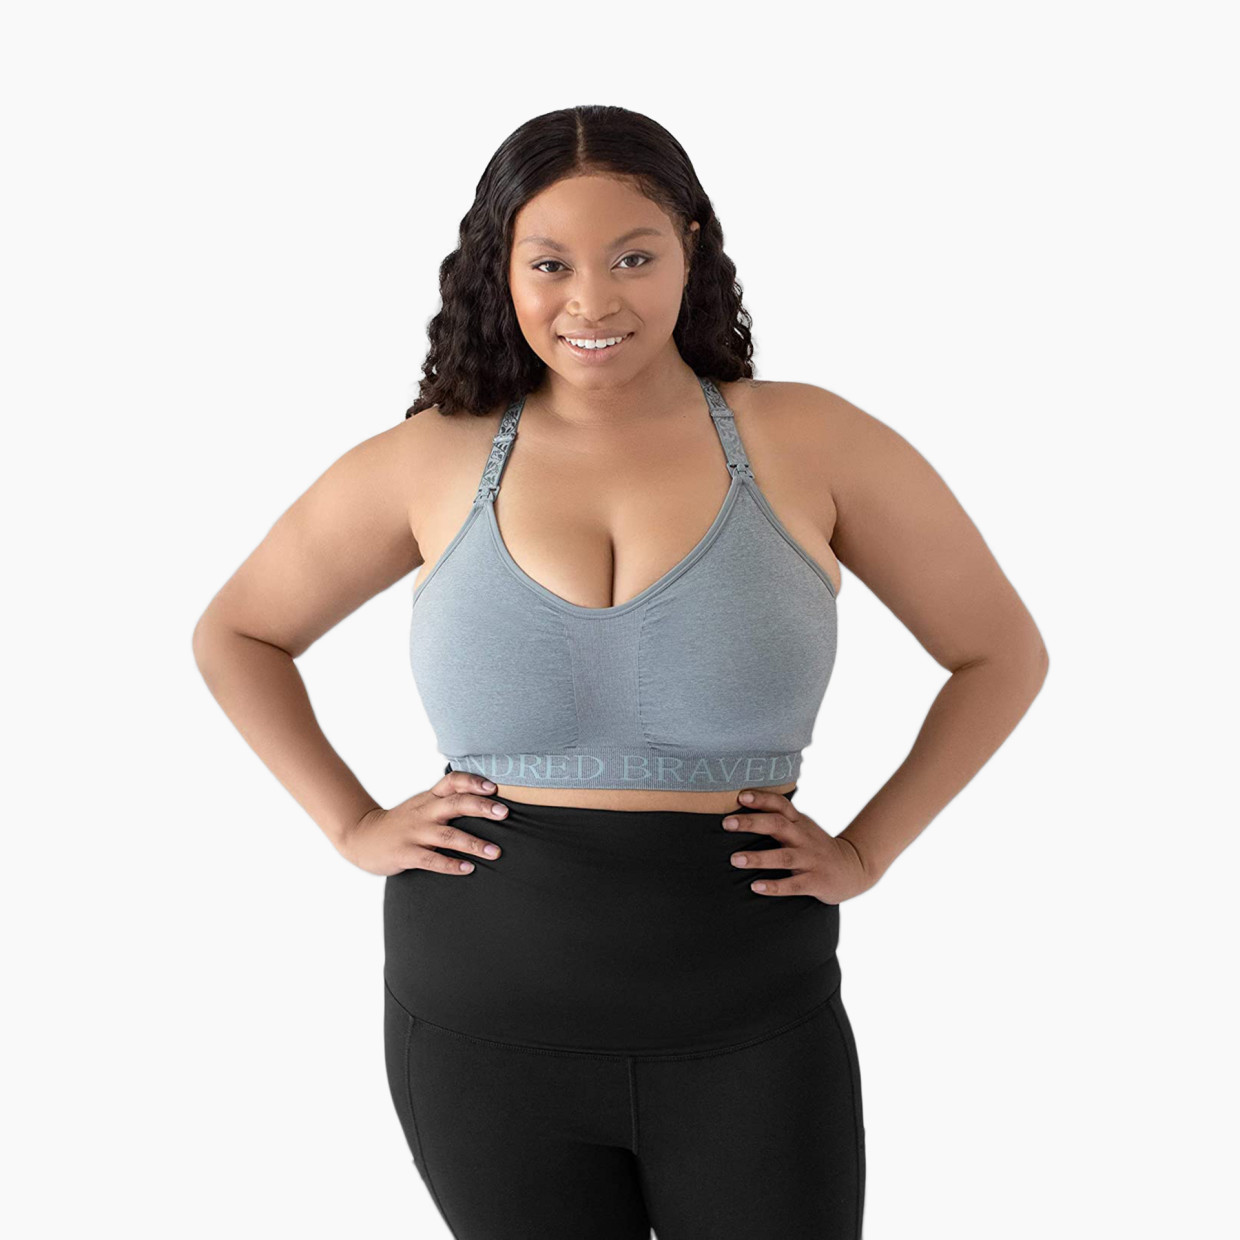 Kindred Bravely Sublime Support Low Impact Nursing & Maternity Sports Bra -  Seaglass Heather, X-Large-Busty